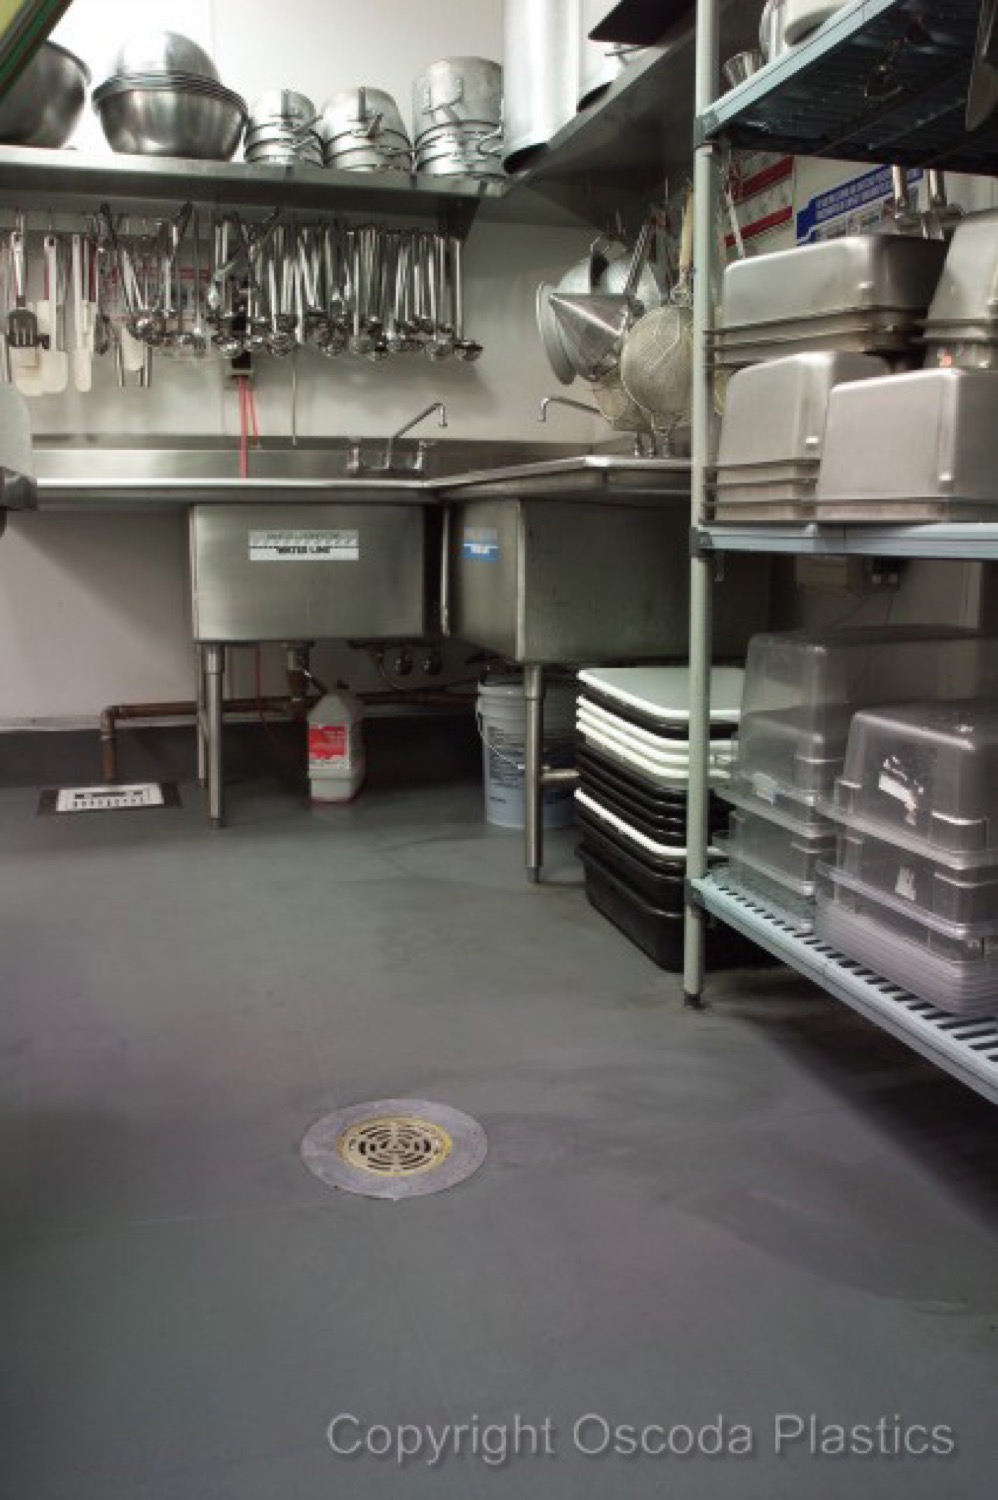 Protect All commercial_kitchen004